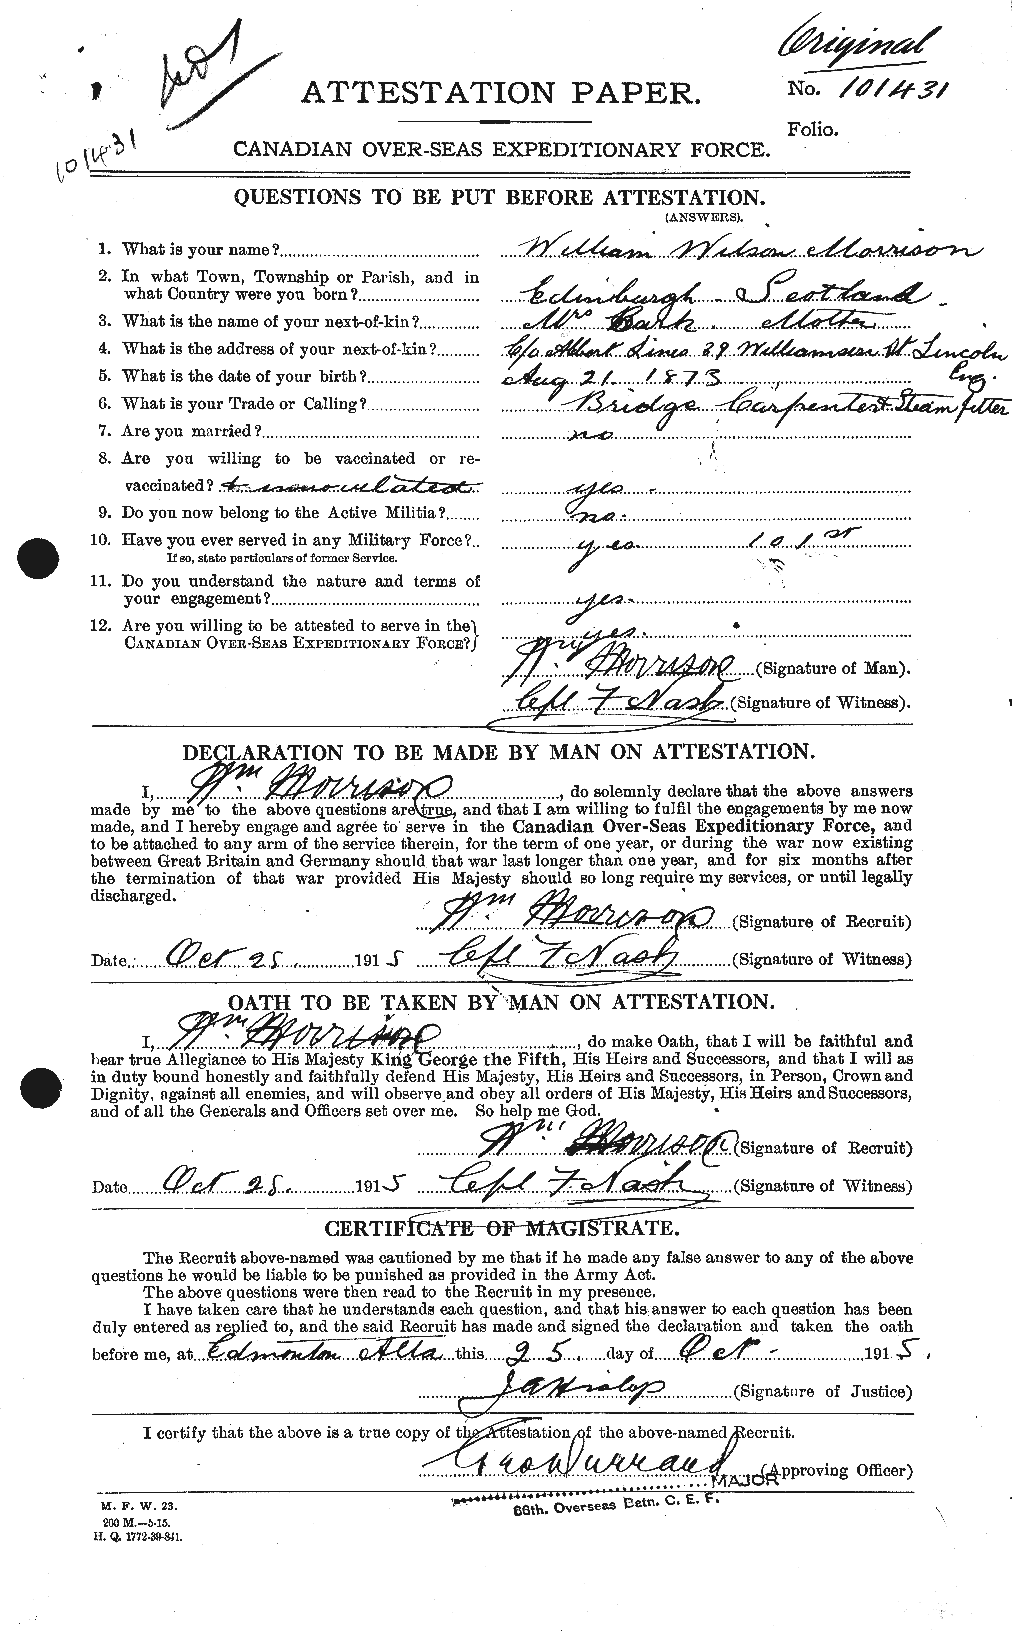 Personnel Records of the First World War - CEF 509331a